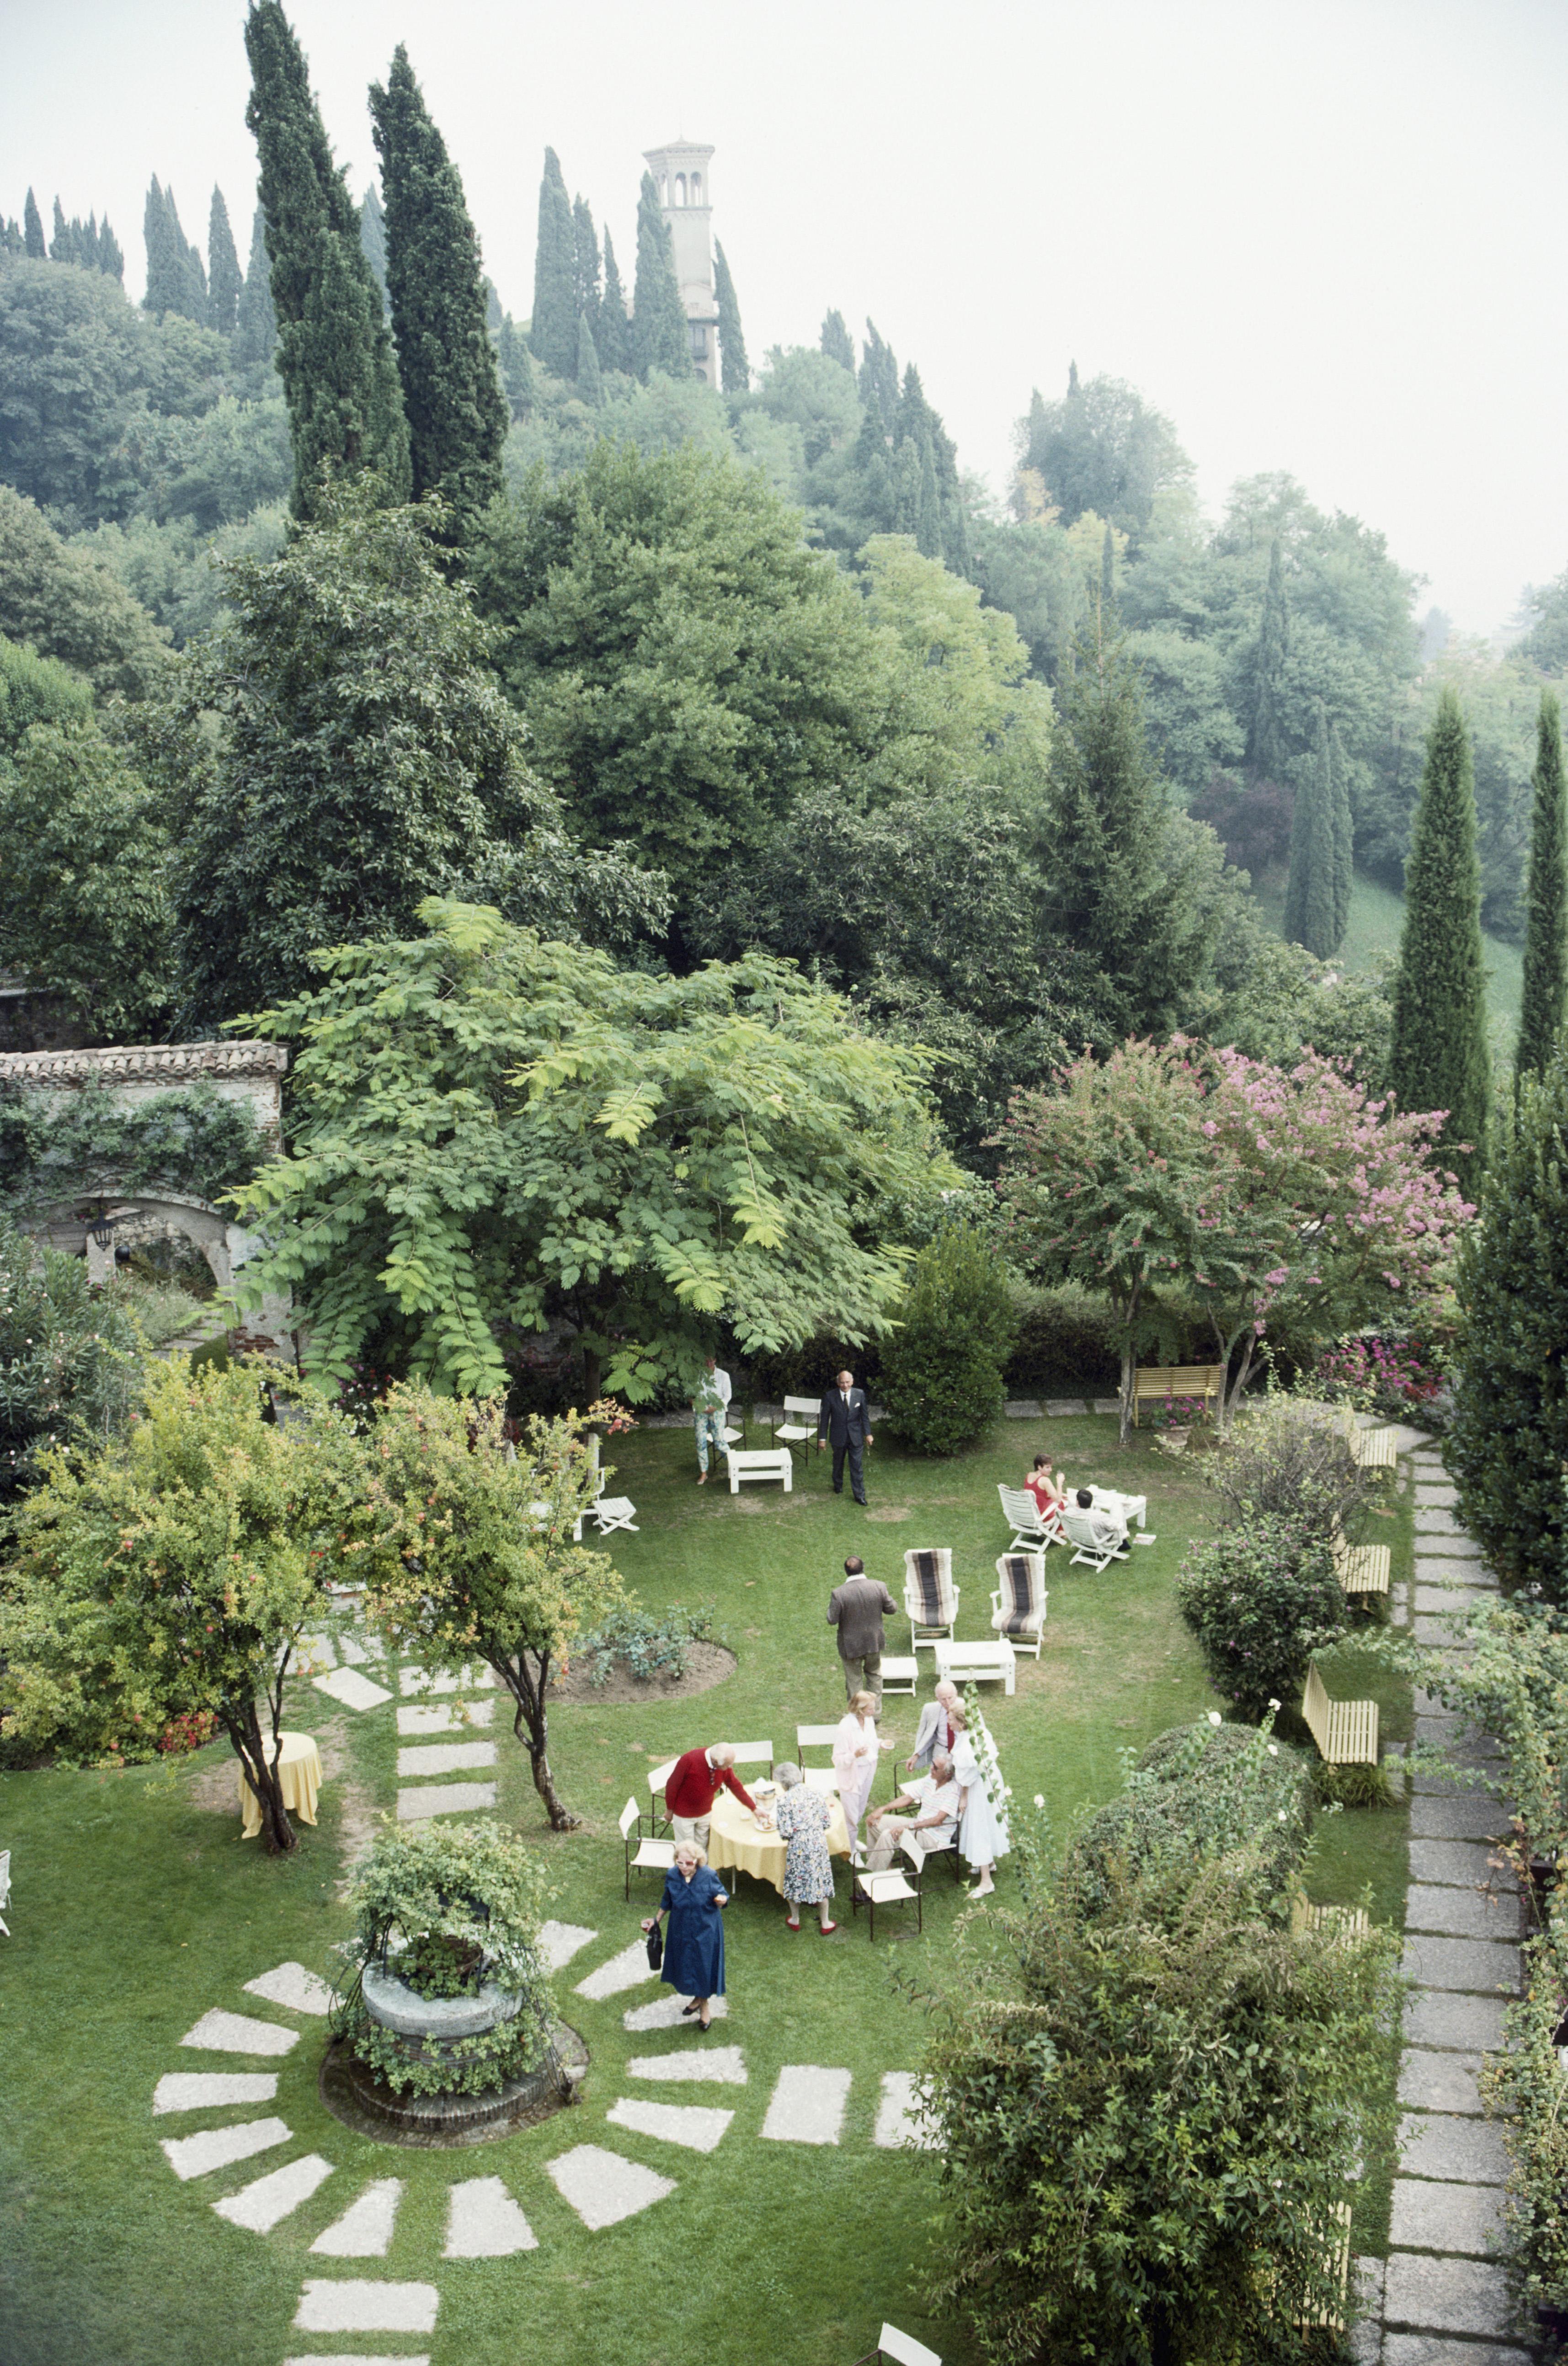 Slim Aarons
Villa Cipriani
1988
C print
Estate stamped and hand numbered edition of 150 with certificate of authenticity from the estate. 

Aerial view of guests in the gardens of the Villa Cipriani in Asolo, Italy, in September 1988. (Photo by Slim